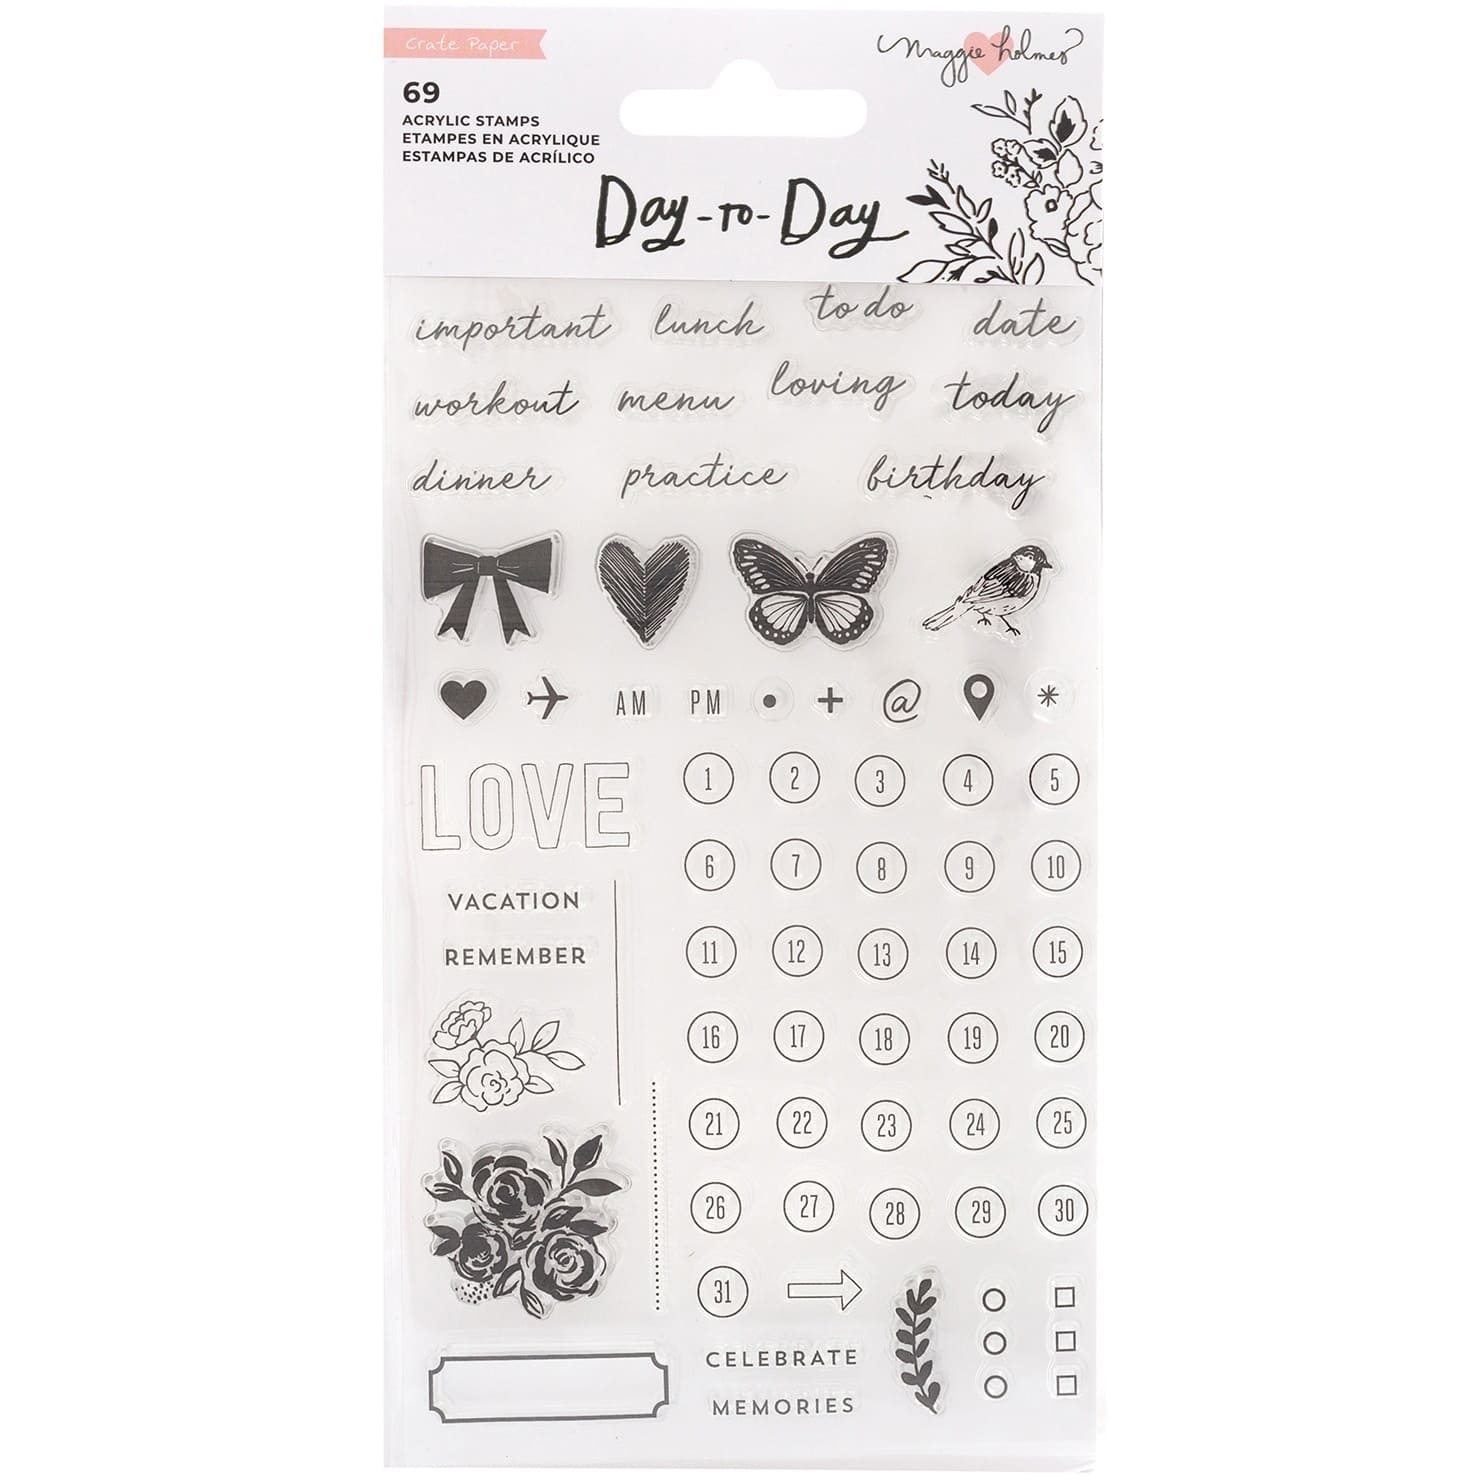 American Crafts&#x2122; Maggie Holmes Day-To-Day Planner Clear Stamp Set